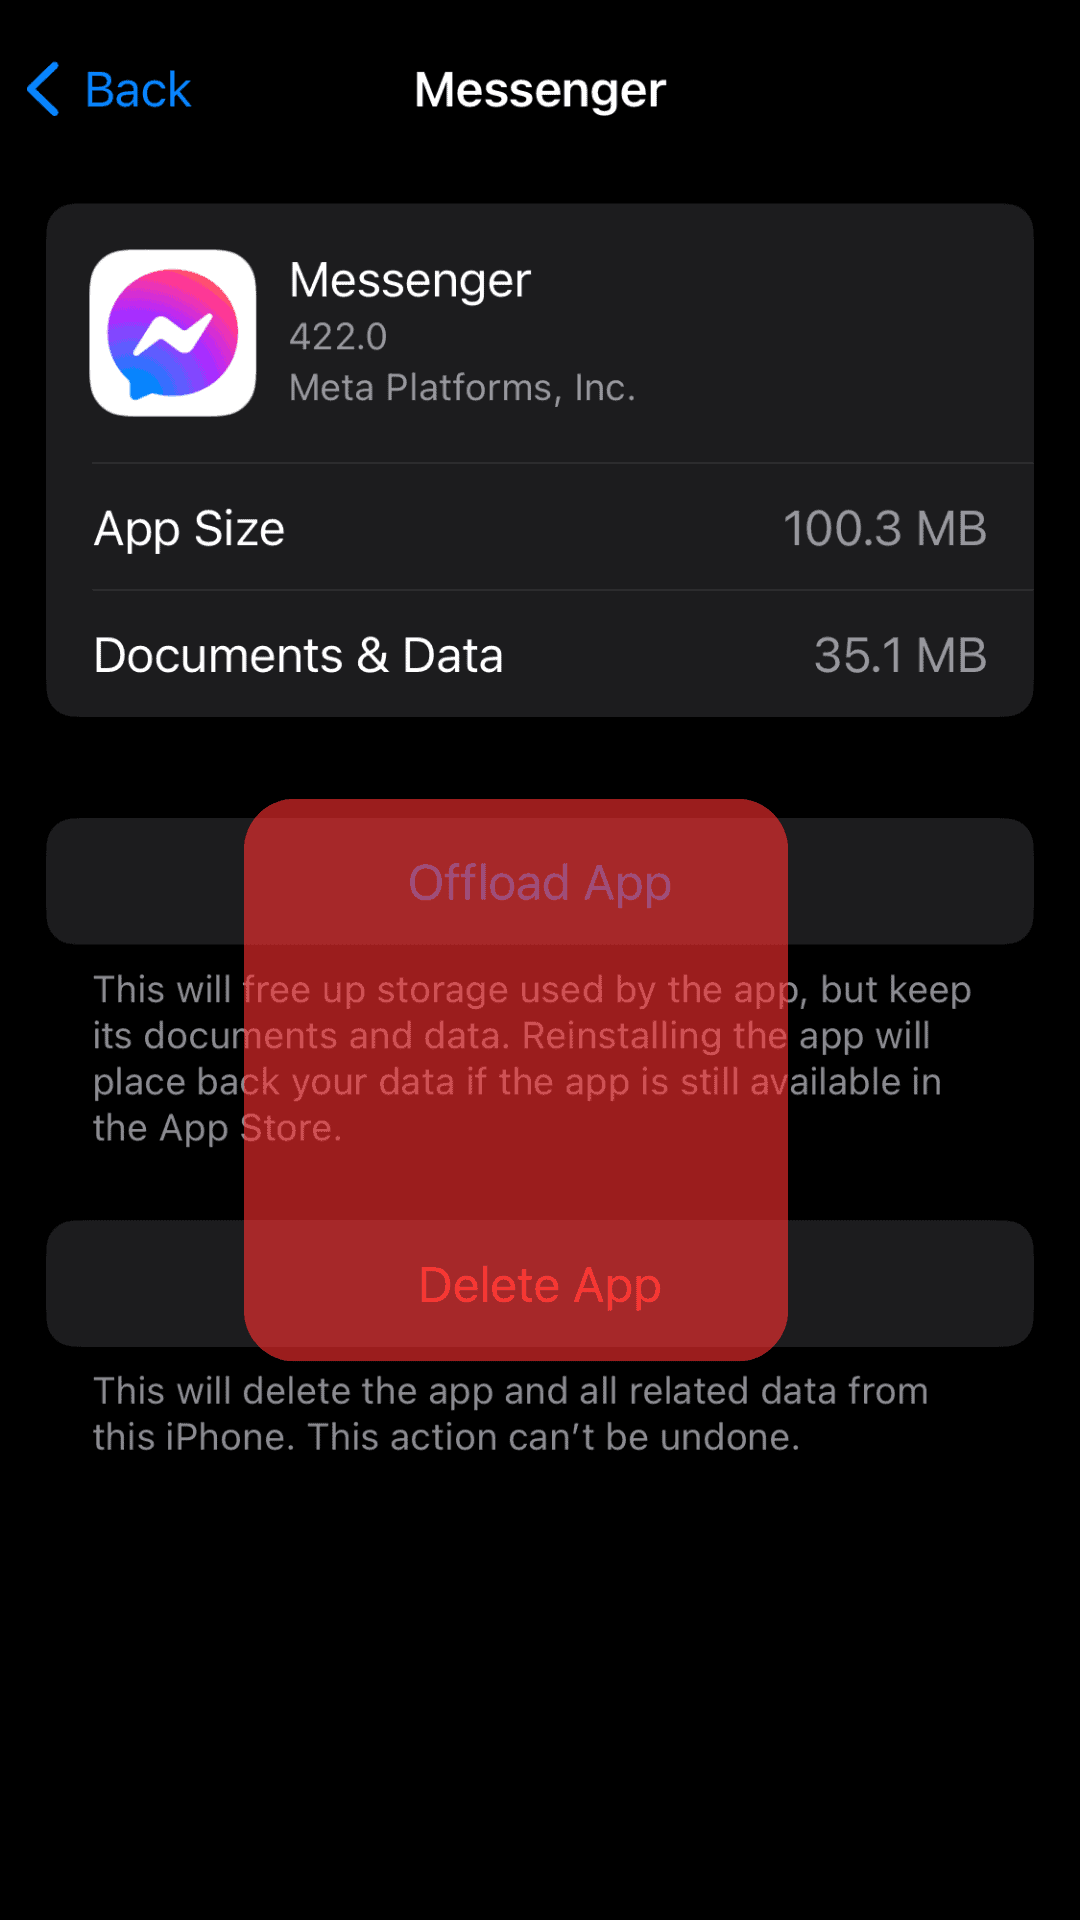 Offload App And Delete App